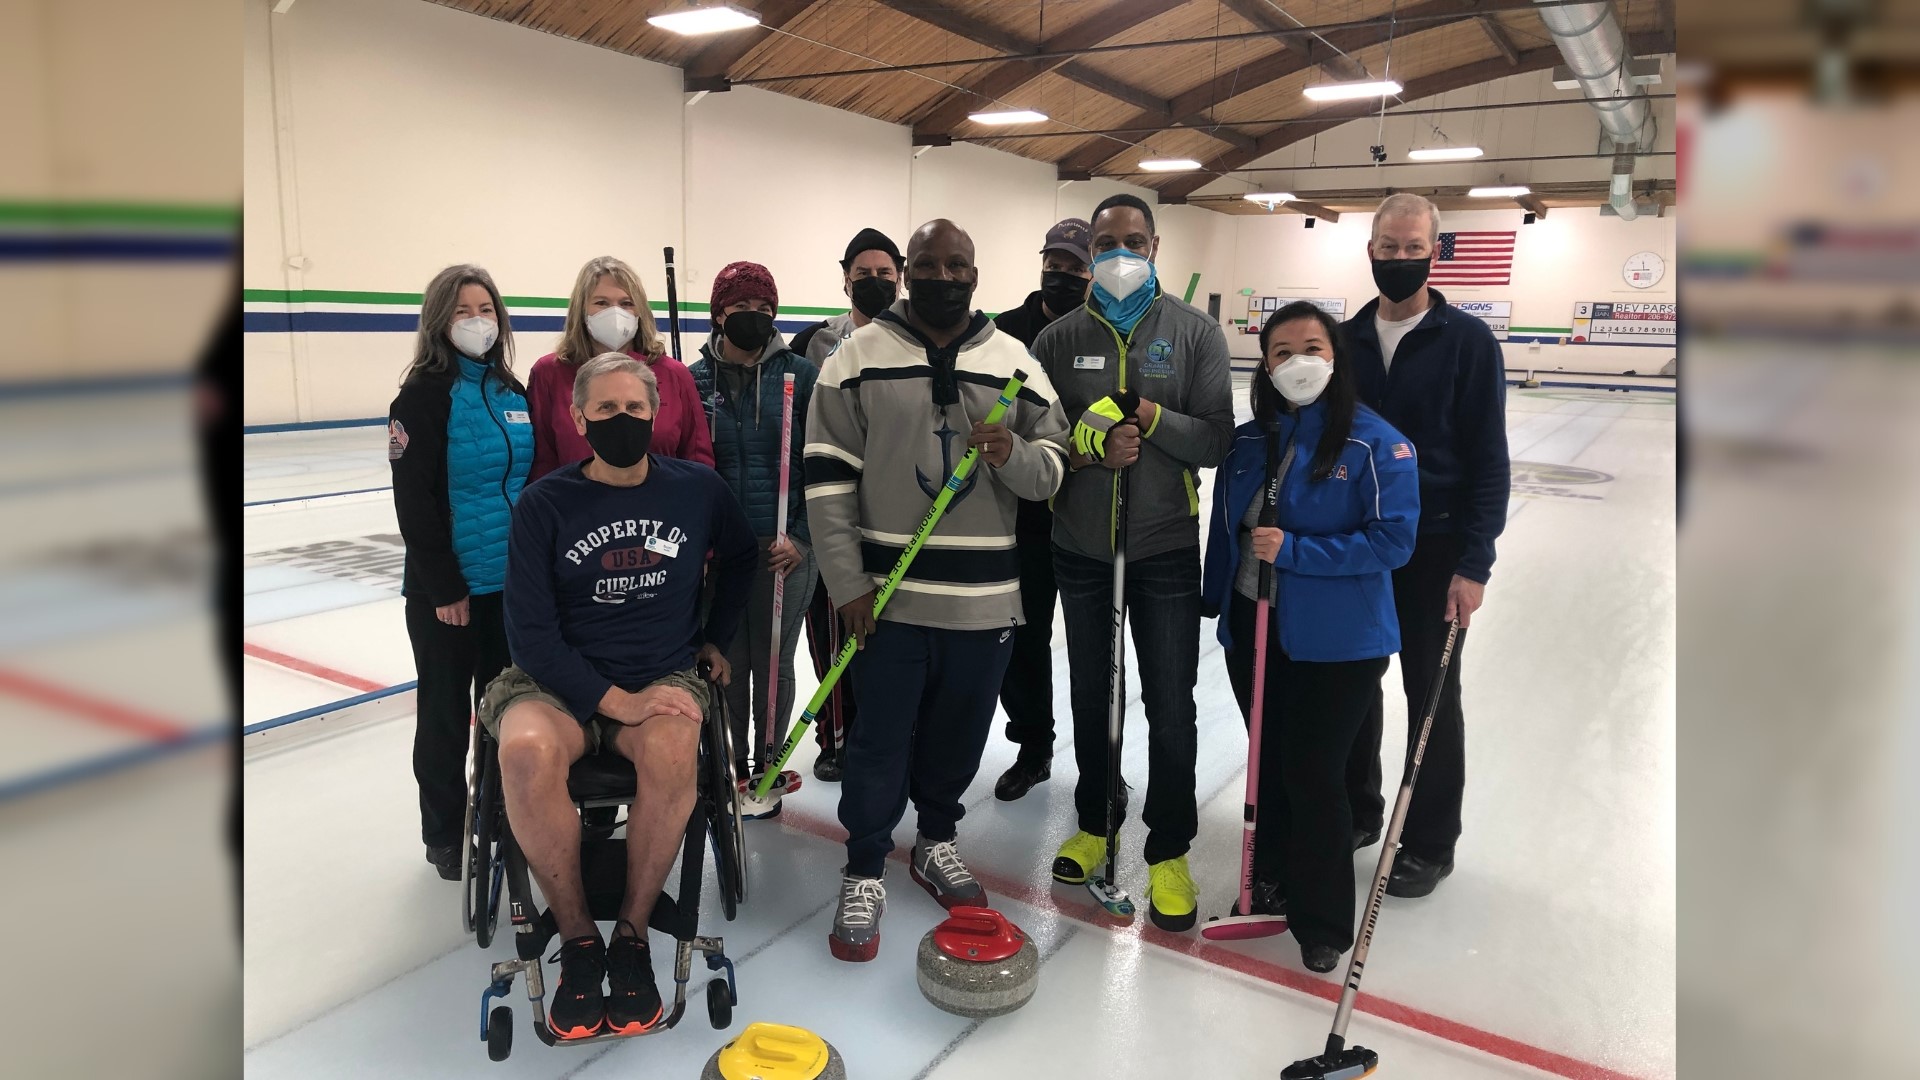 Getting ready for the Winter Olympics with curling